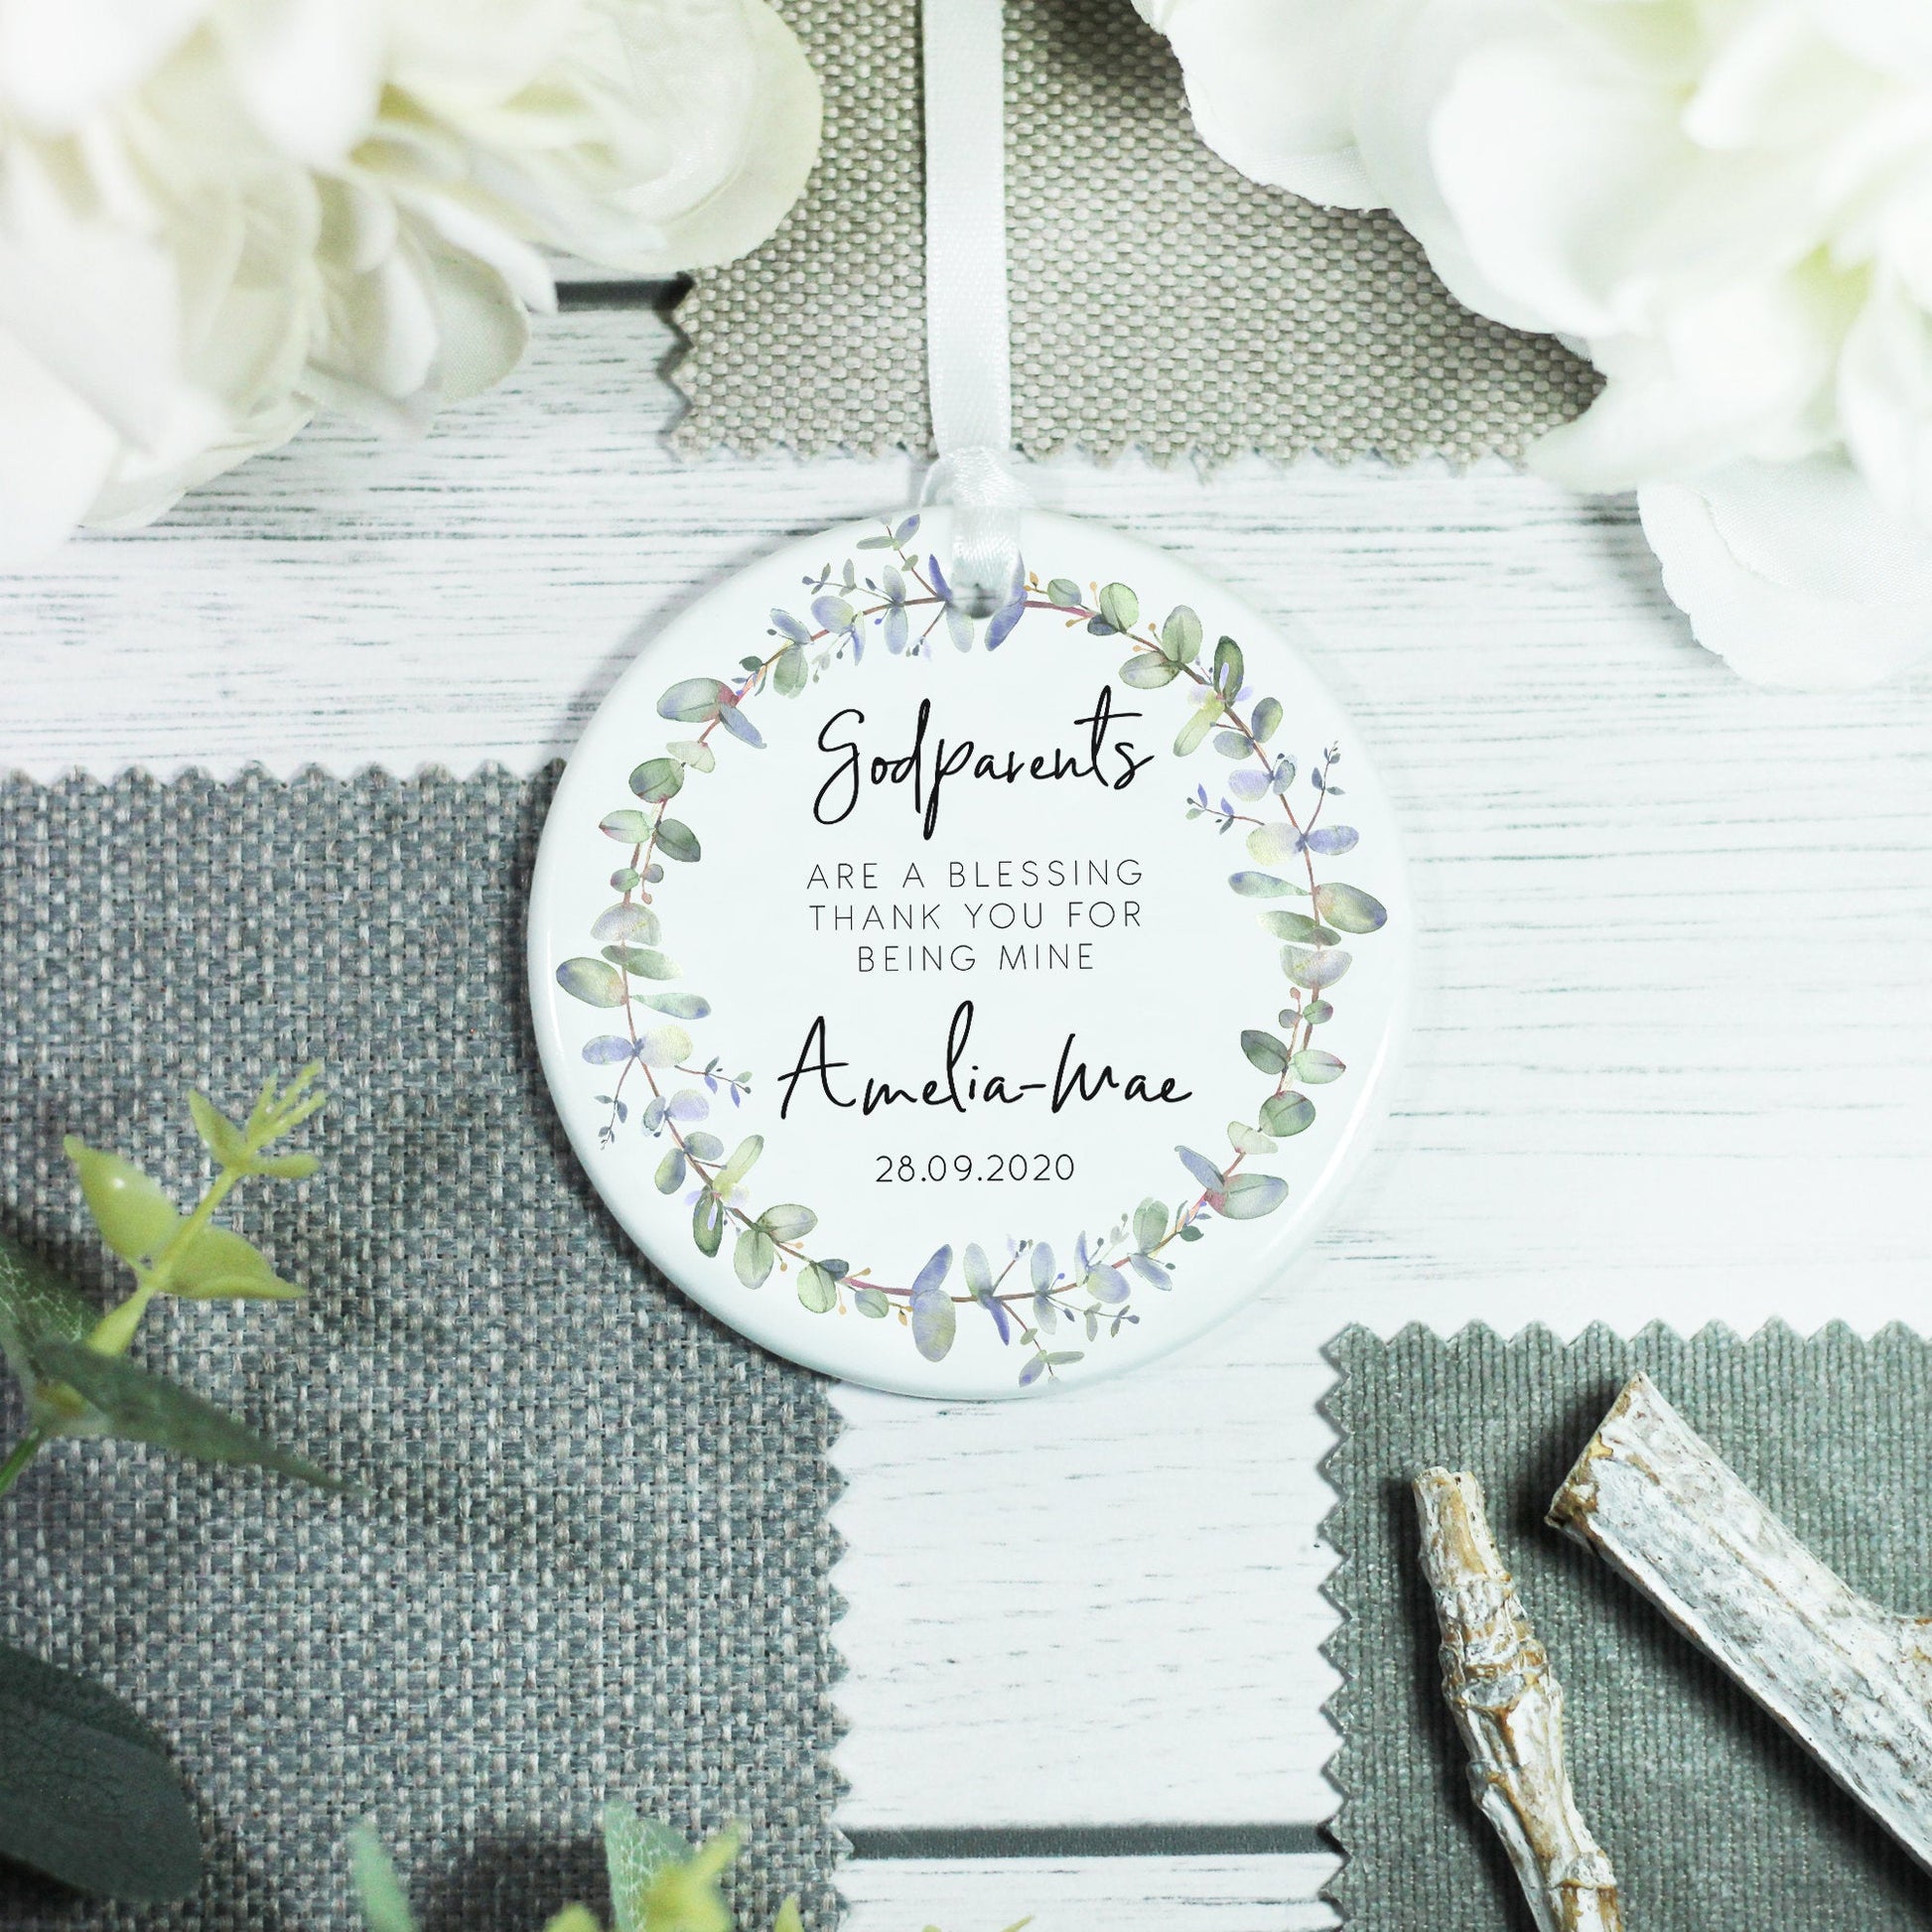 Personalised Godmother Ceramic Keepsake - From Willow | Personalised Gifts